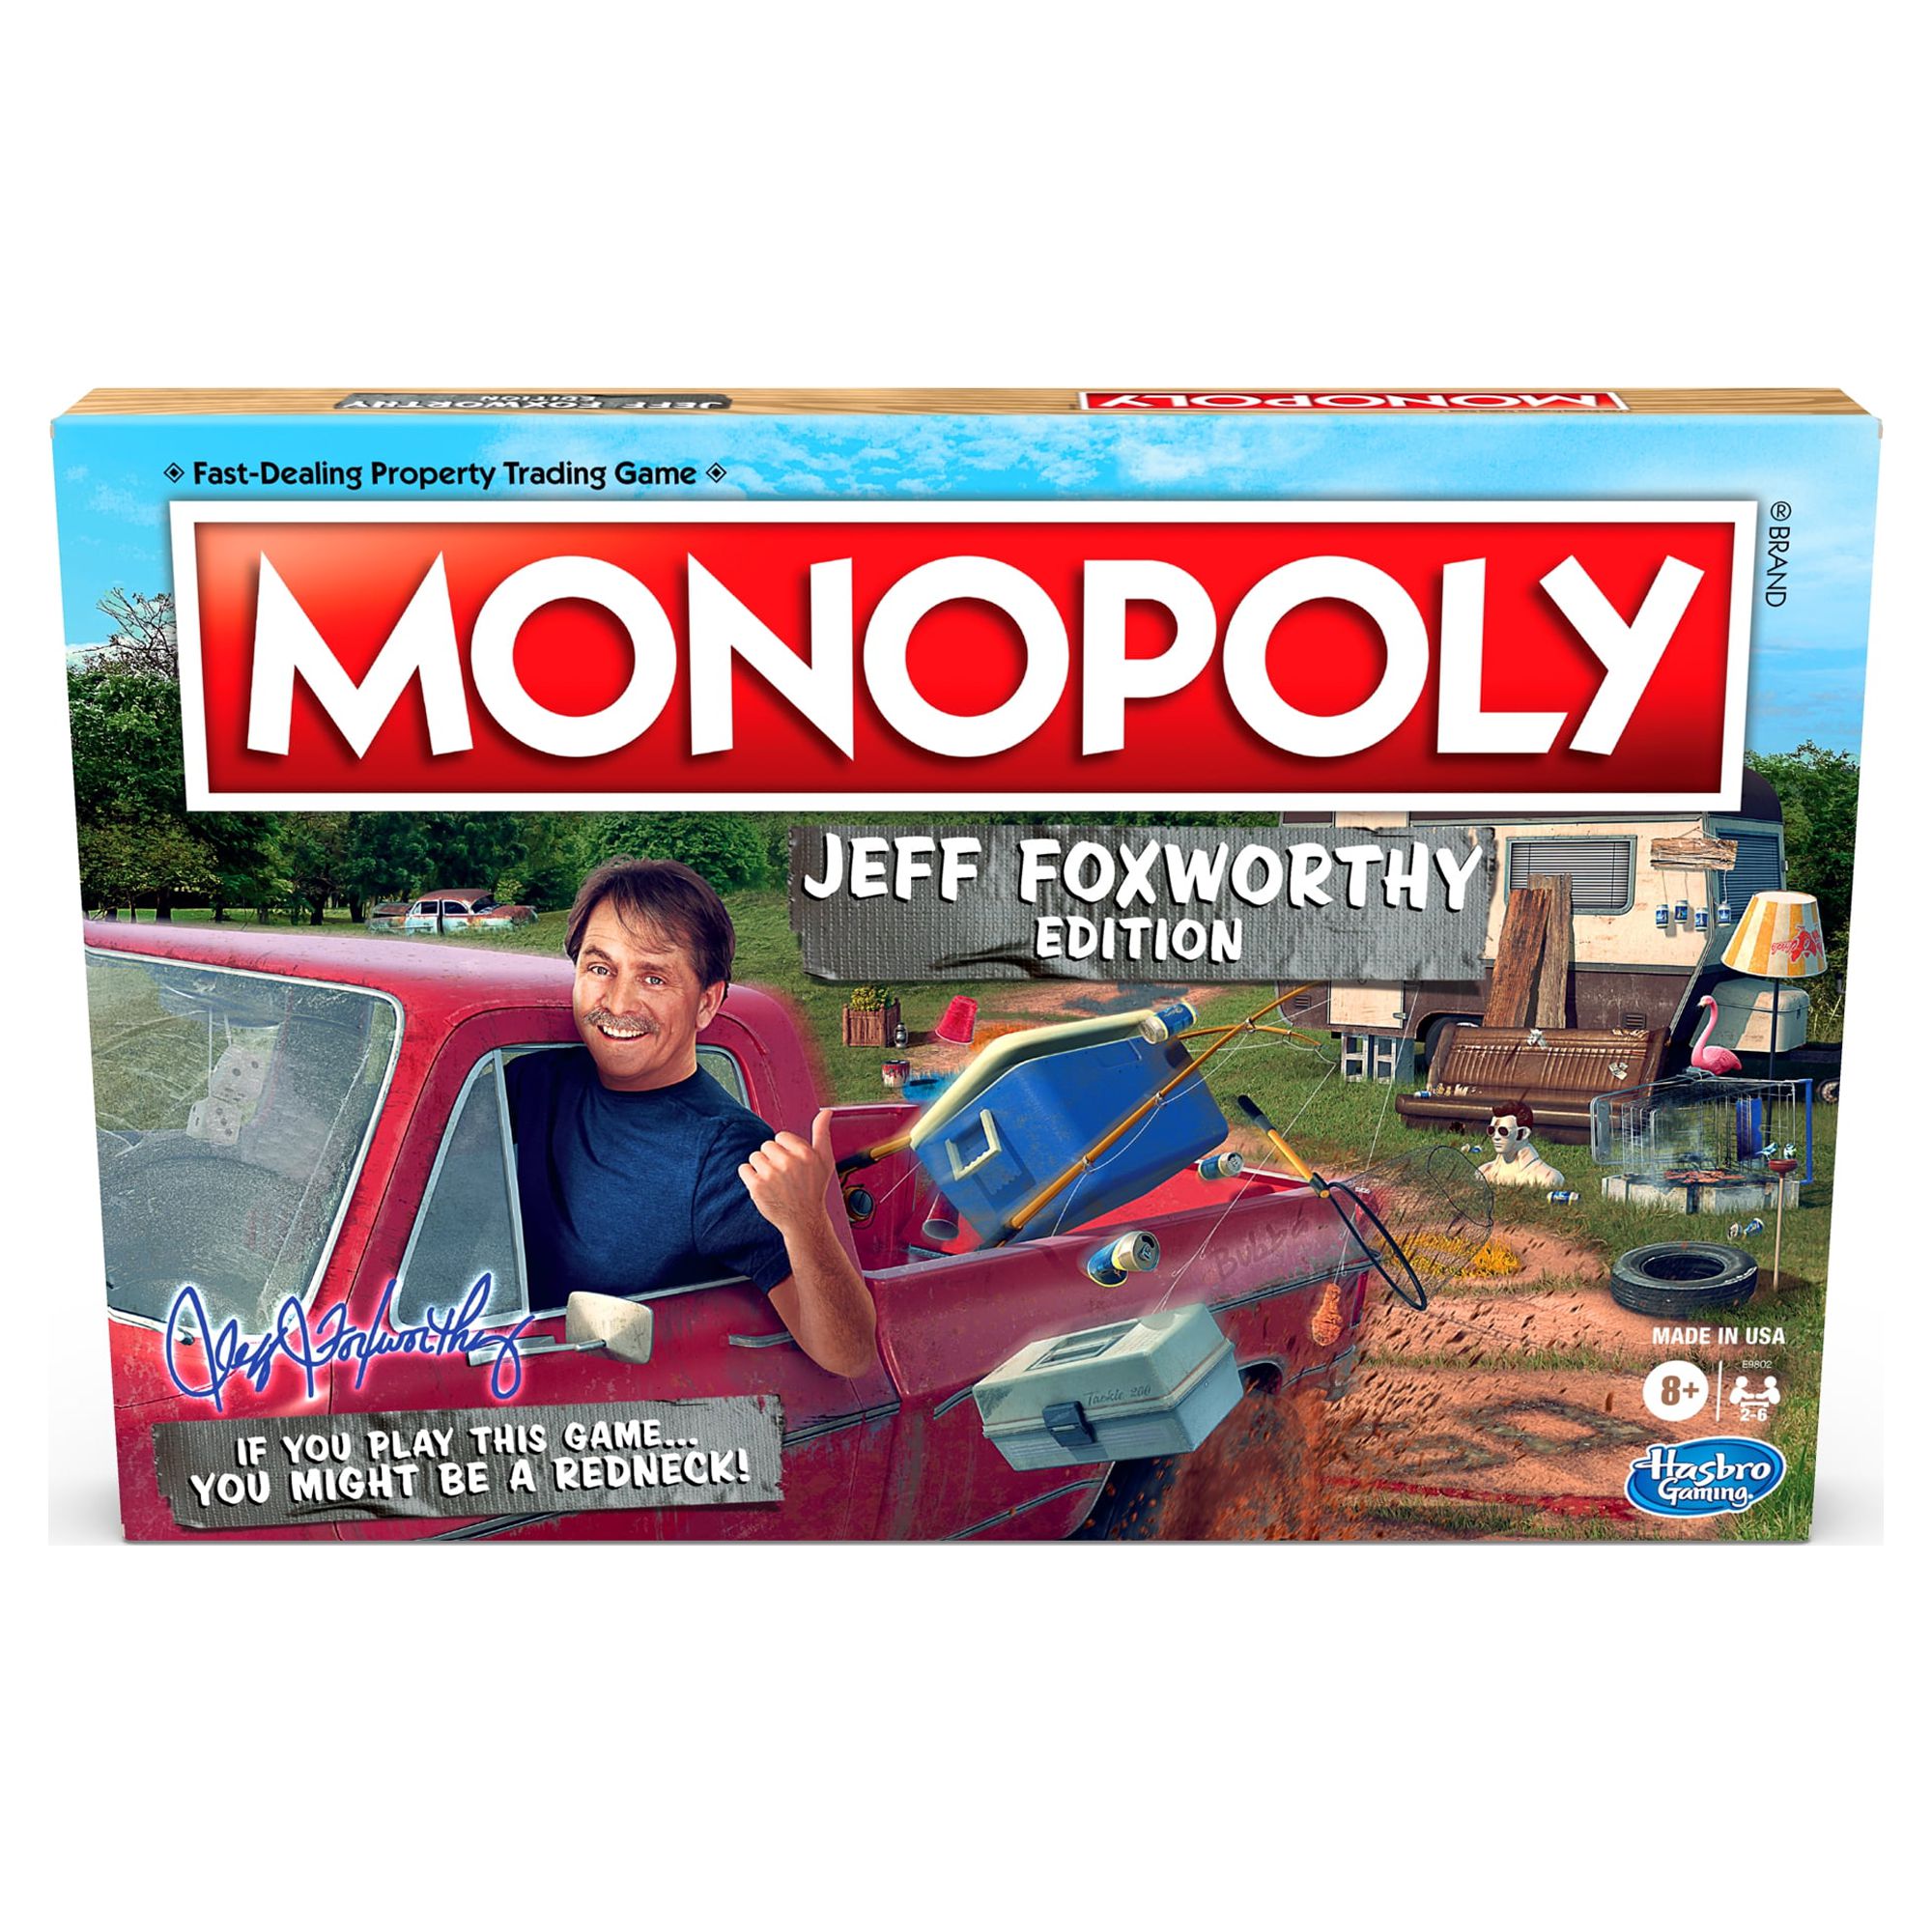 Monopoly Jeff Foxworthy Edition Board Game for Kids and Family Ages 8 and Up, 2-6 Players - image 1 of 6